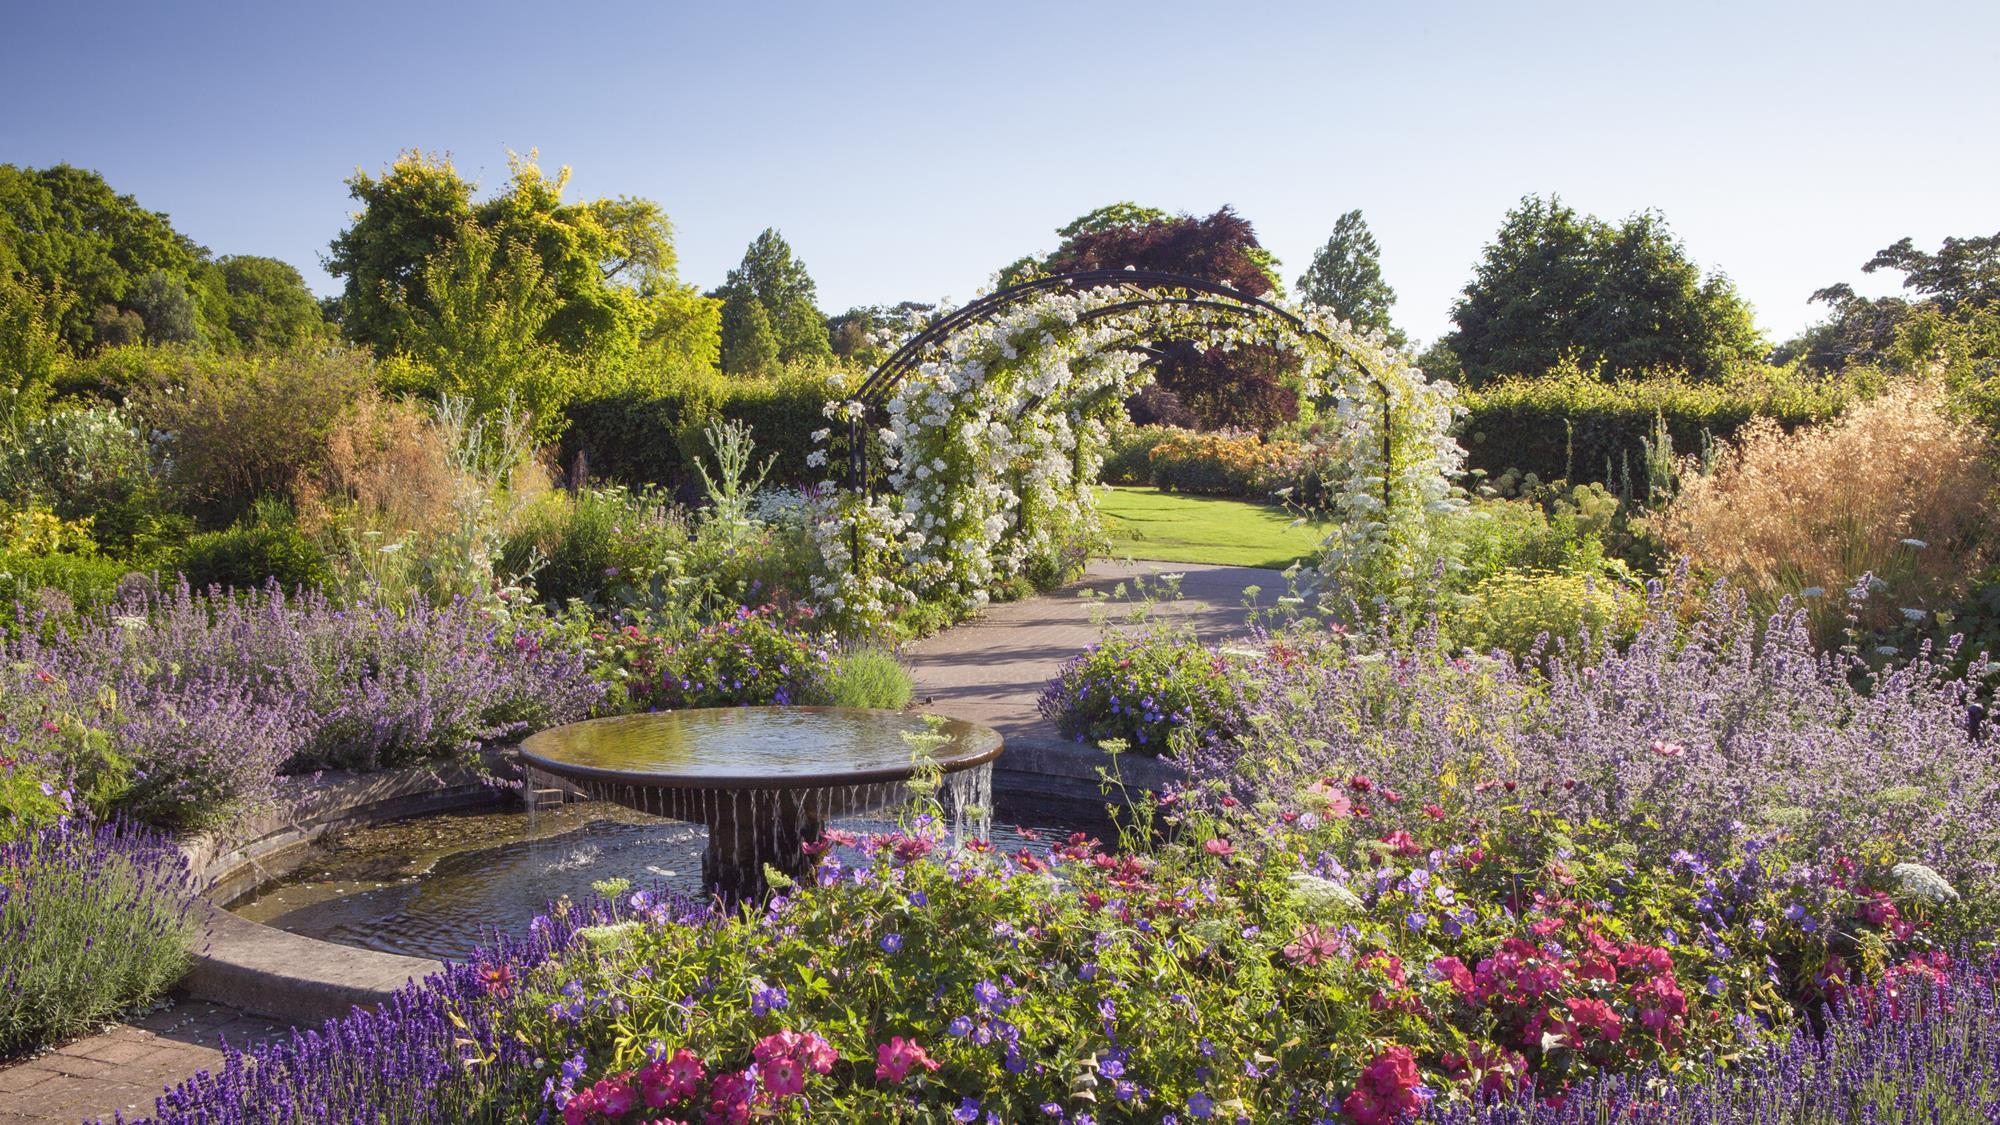 RHS gardens aim to offer beautiful days out again this year Features